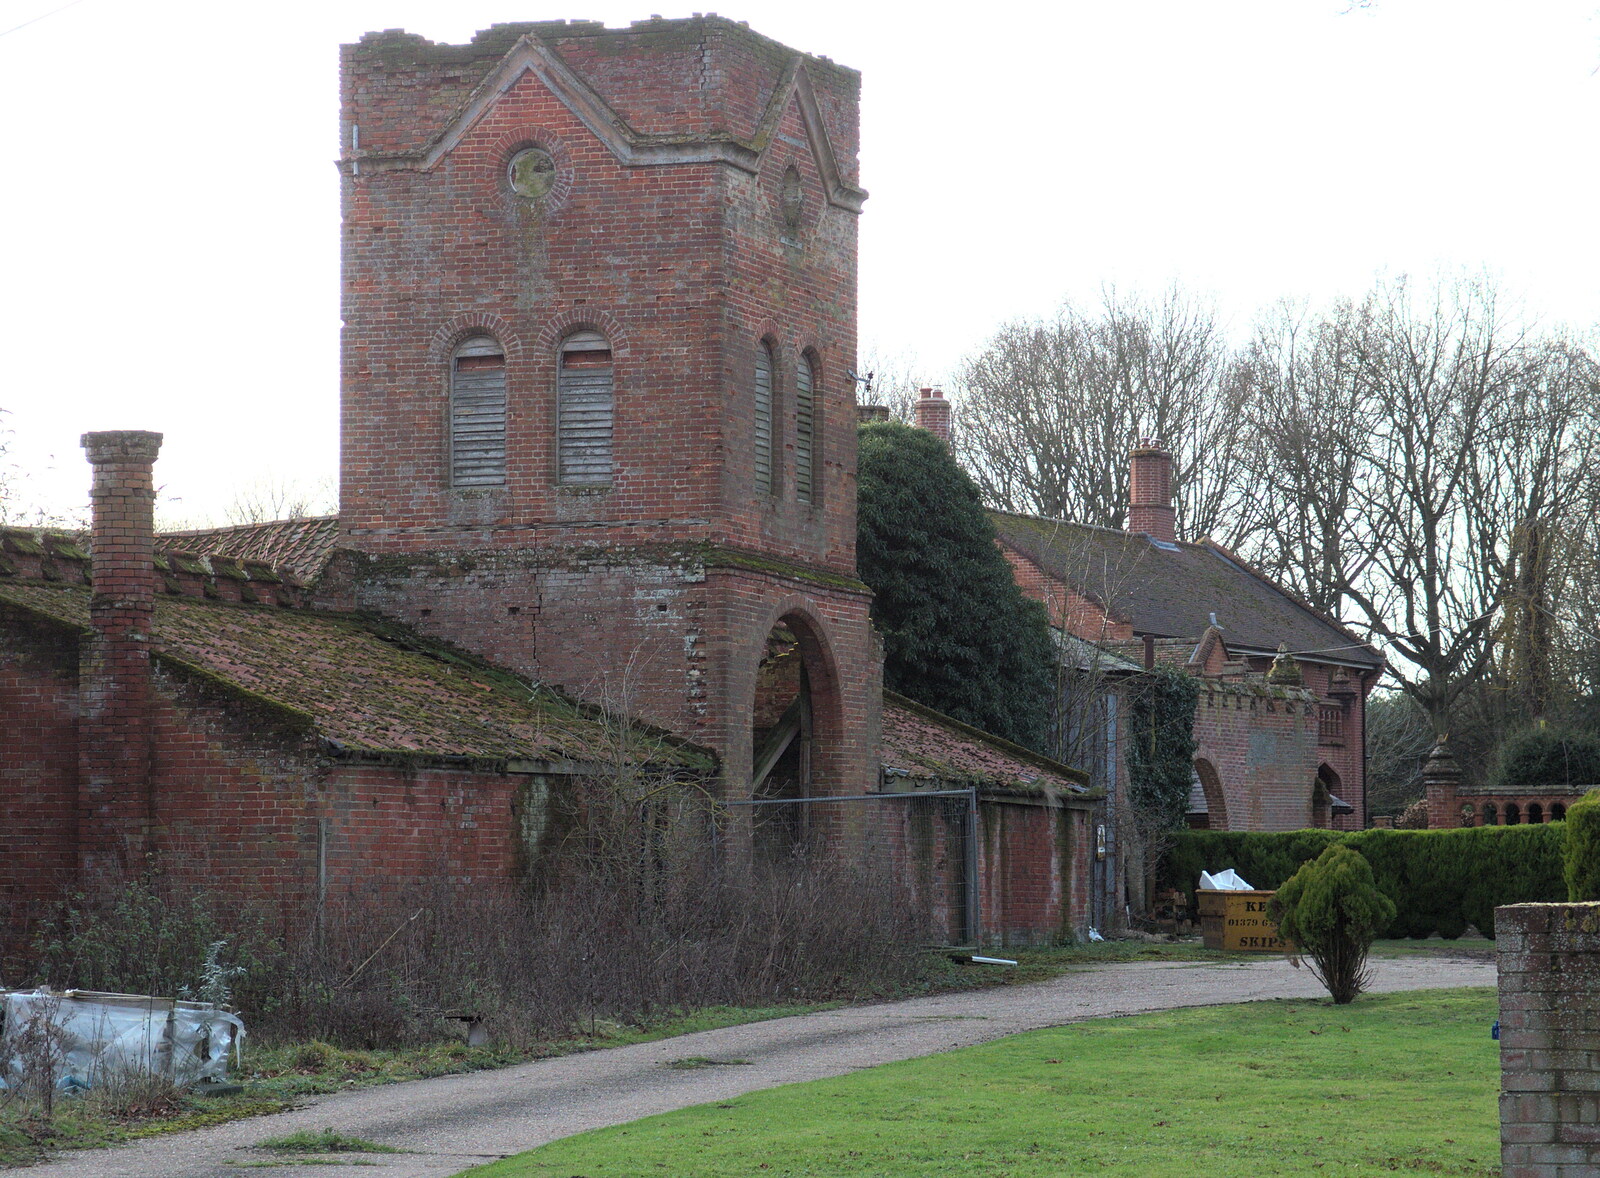 The nearly-derelict clock tower of Brome Hall from The BBs do a Recording, Hethel, Norfolk - 18th January 2015